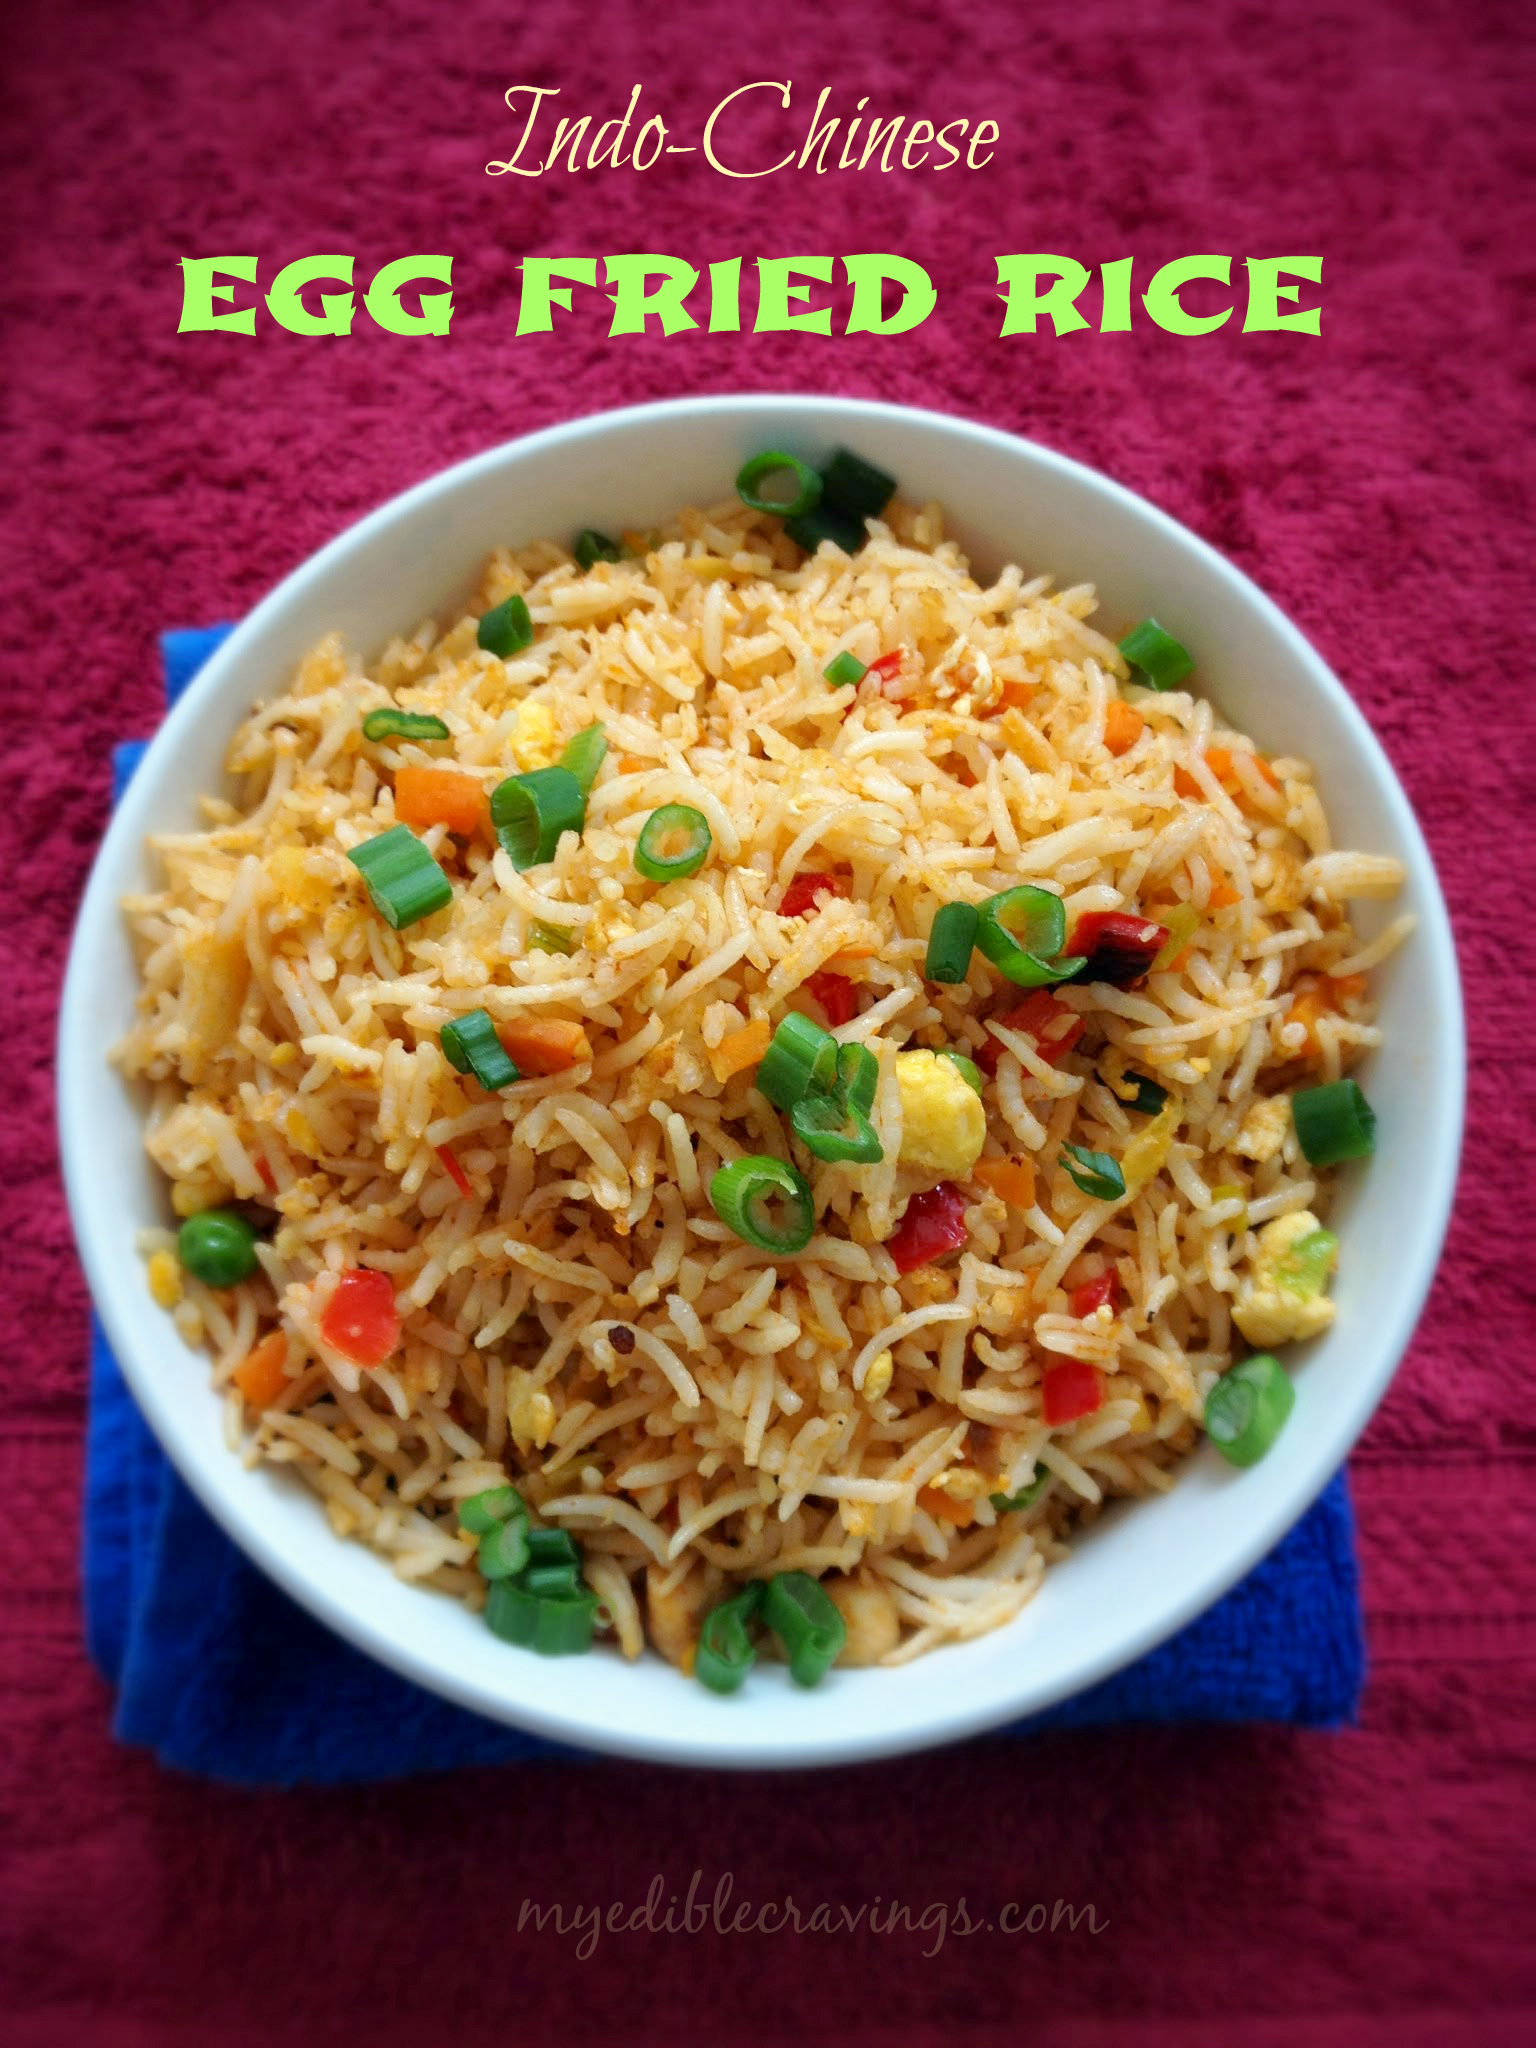 INDO-CHINESE FRIED RICE - MyEdibleCravings